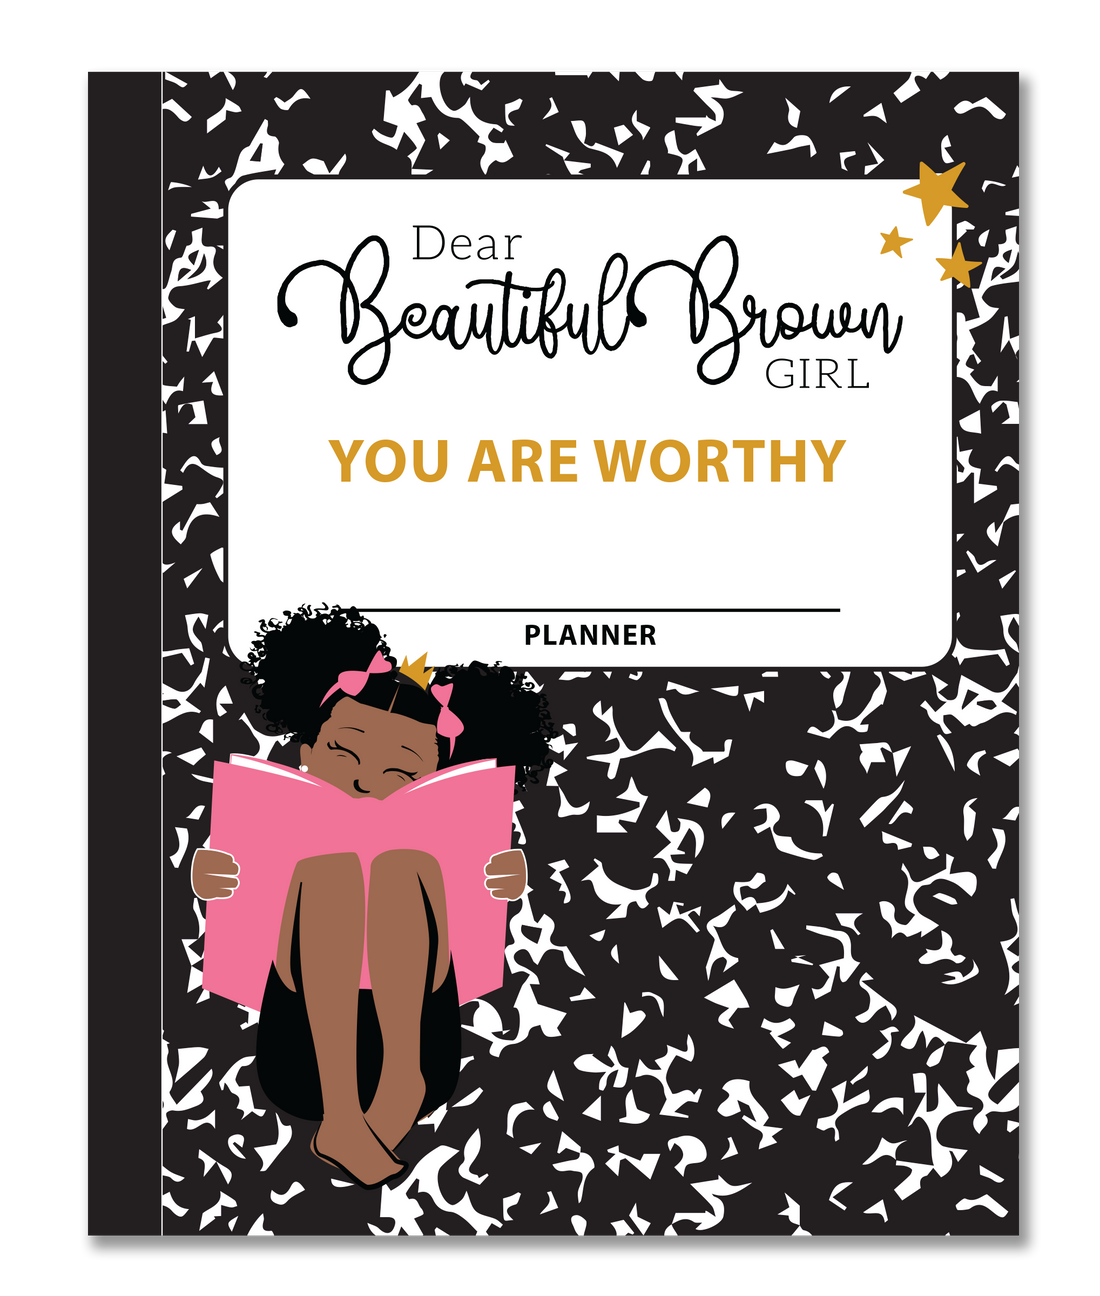 Dear Beautiful Brown Girl: All in One Ultimate Monthly & Weekly Undated Calendar Planner